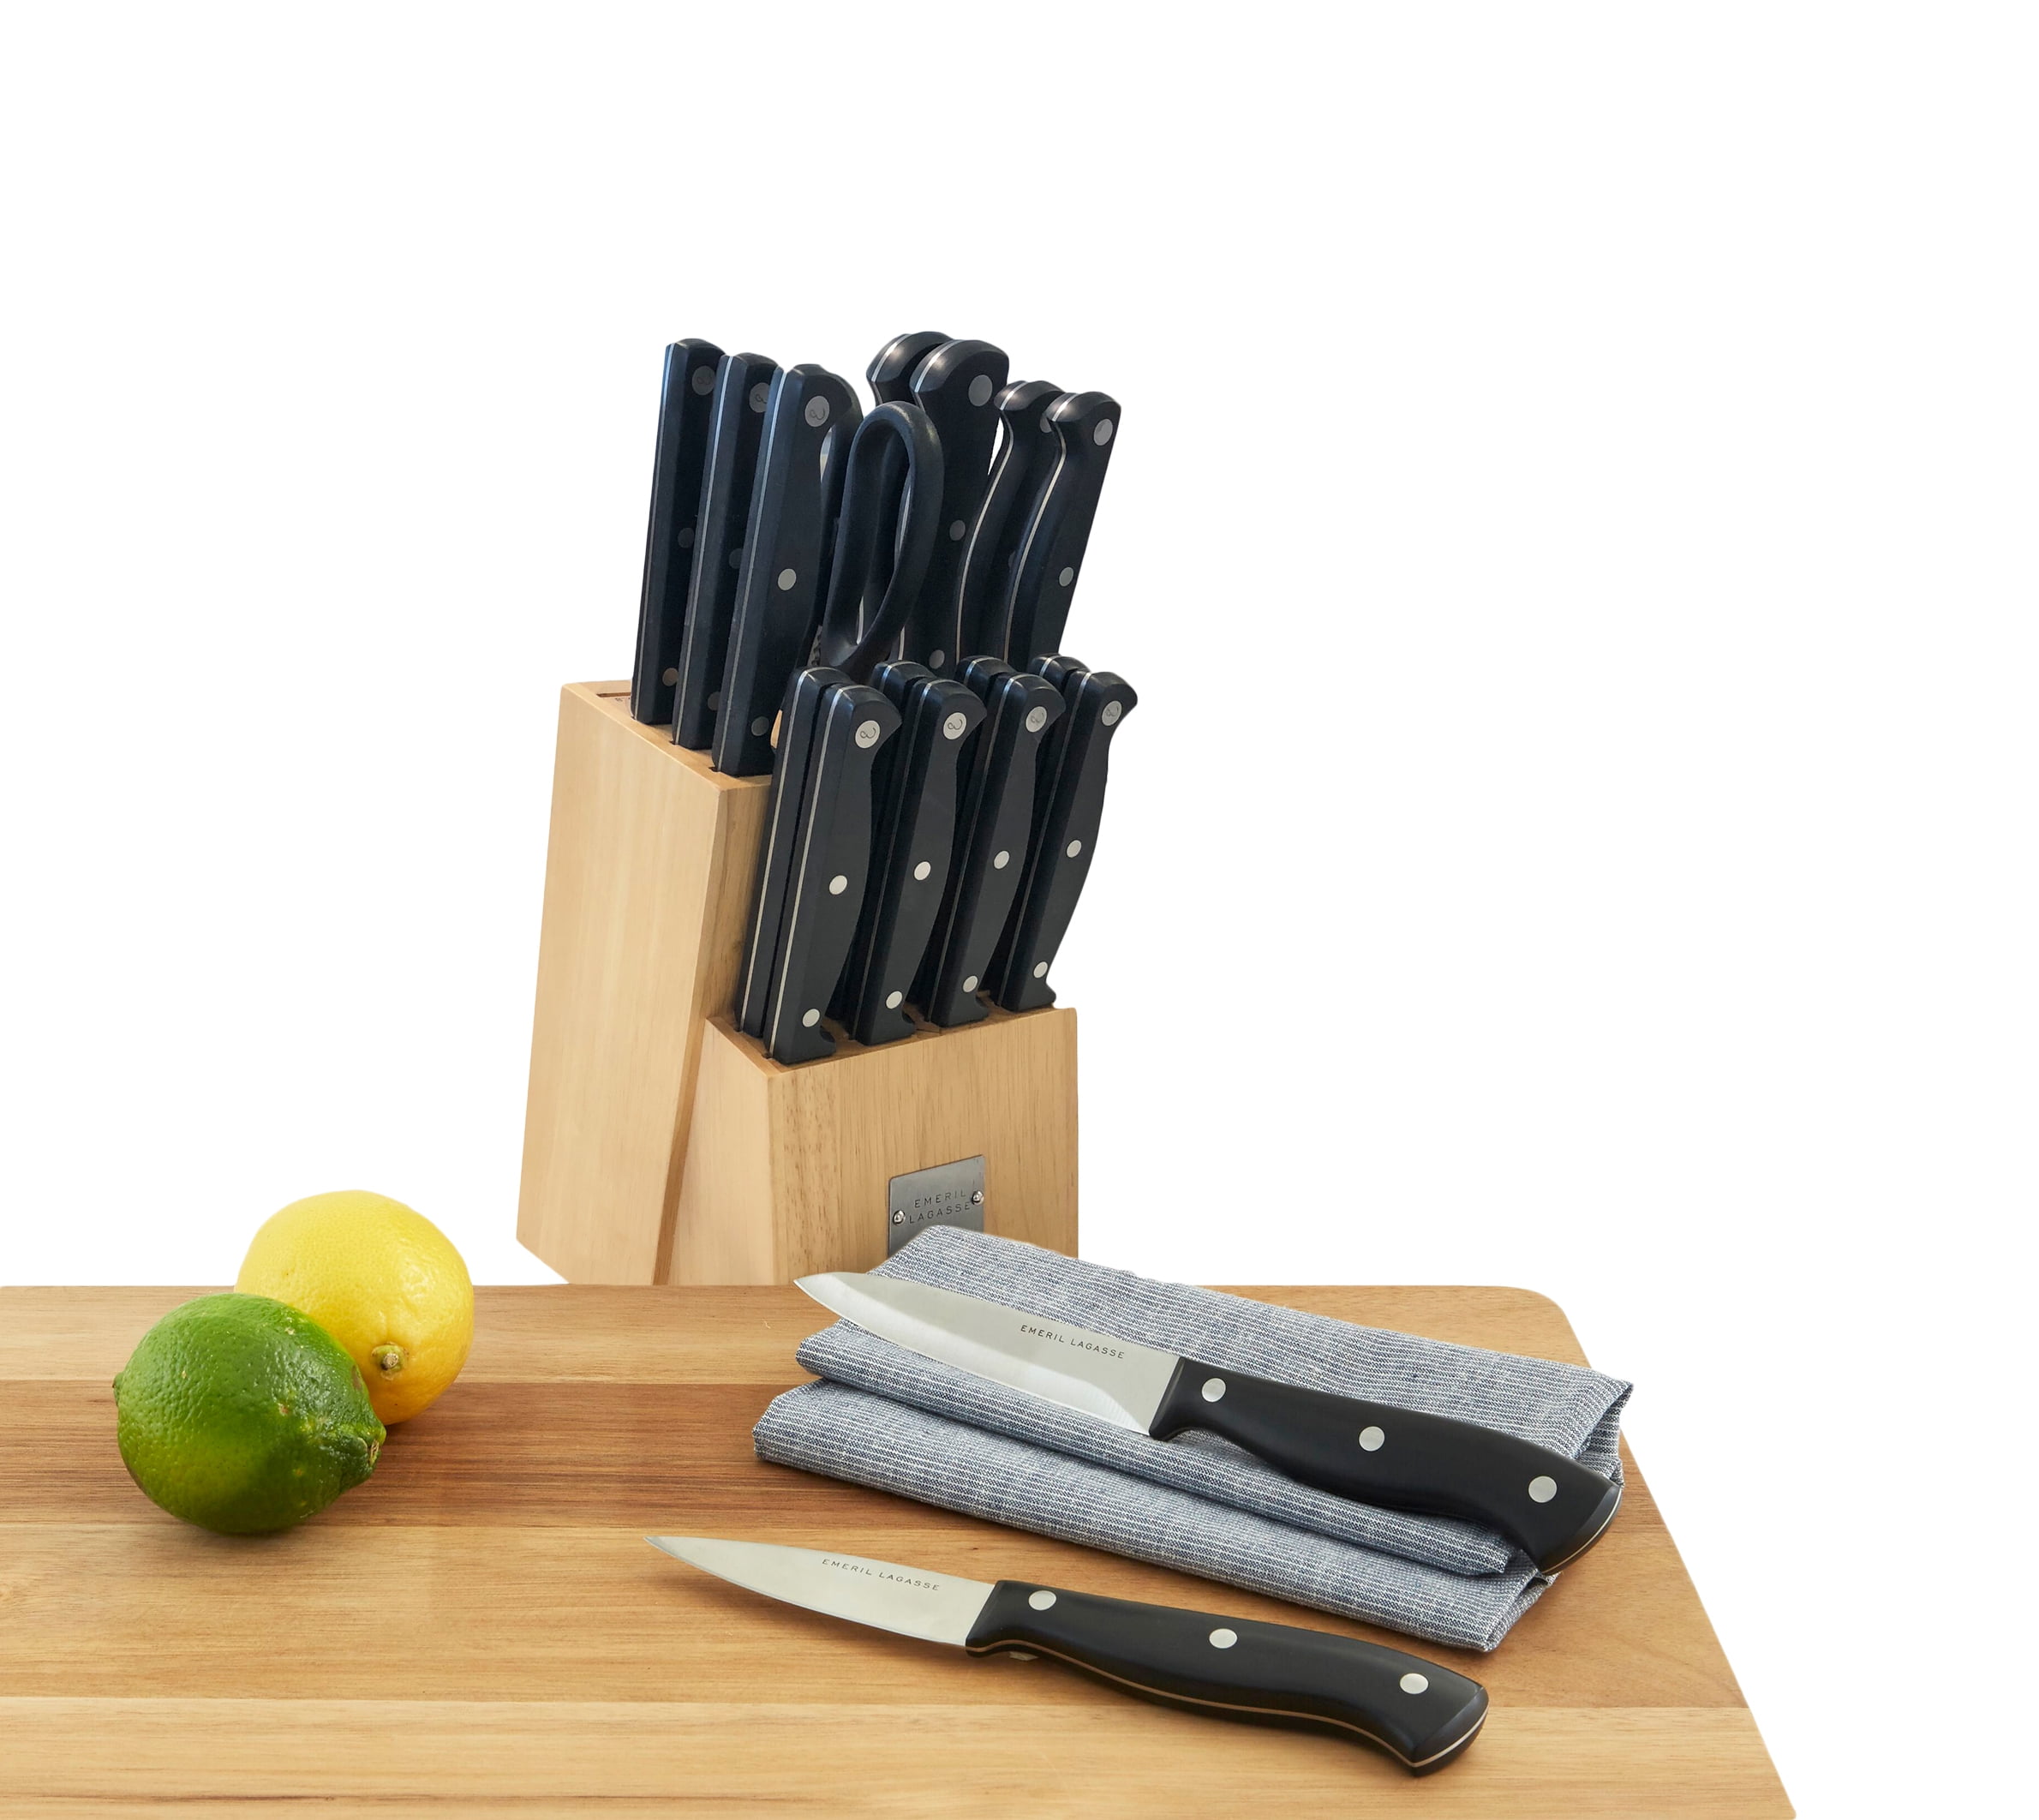 Emeril Lagasse 14 Piece Knife Set - Assembled Product Weight